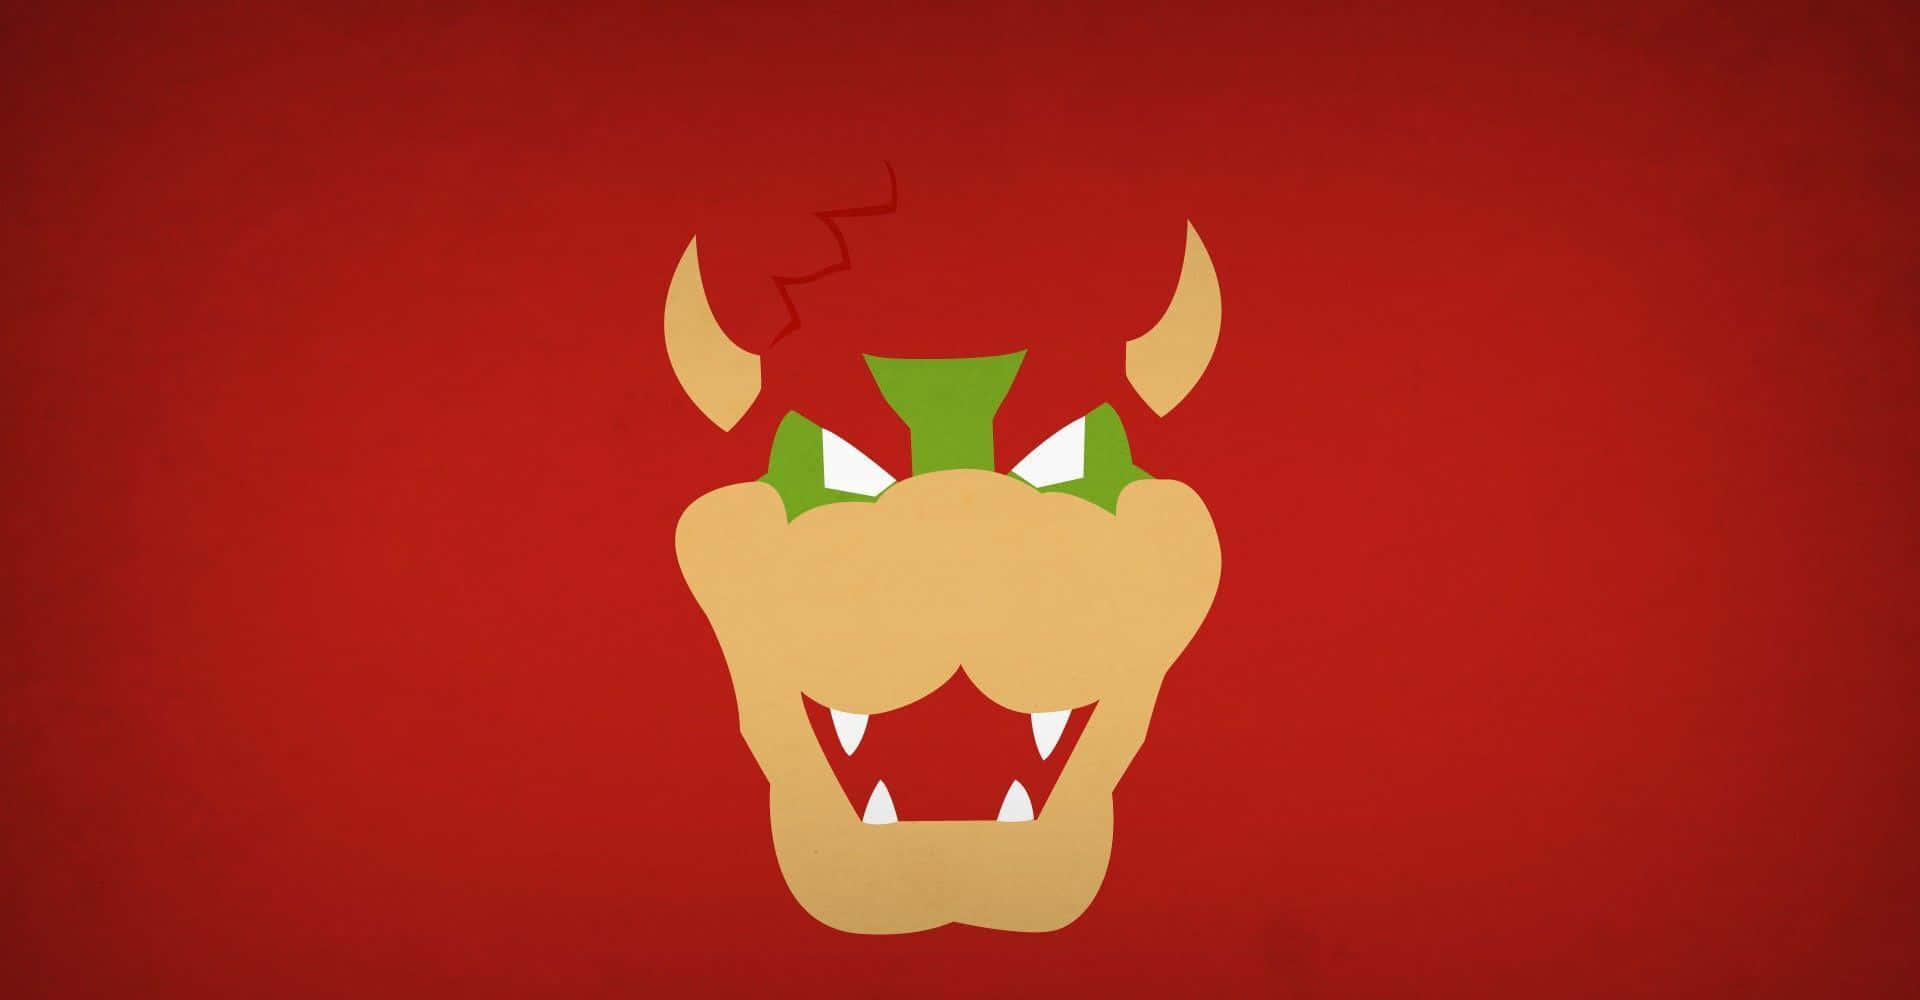 The Mighty Bowser Roars in the Dark Wallpaper